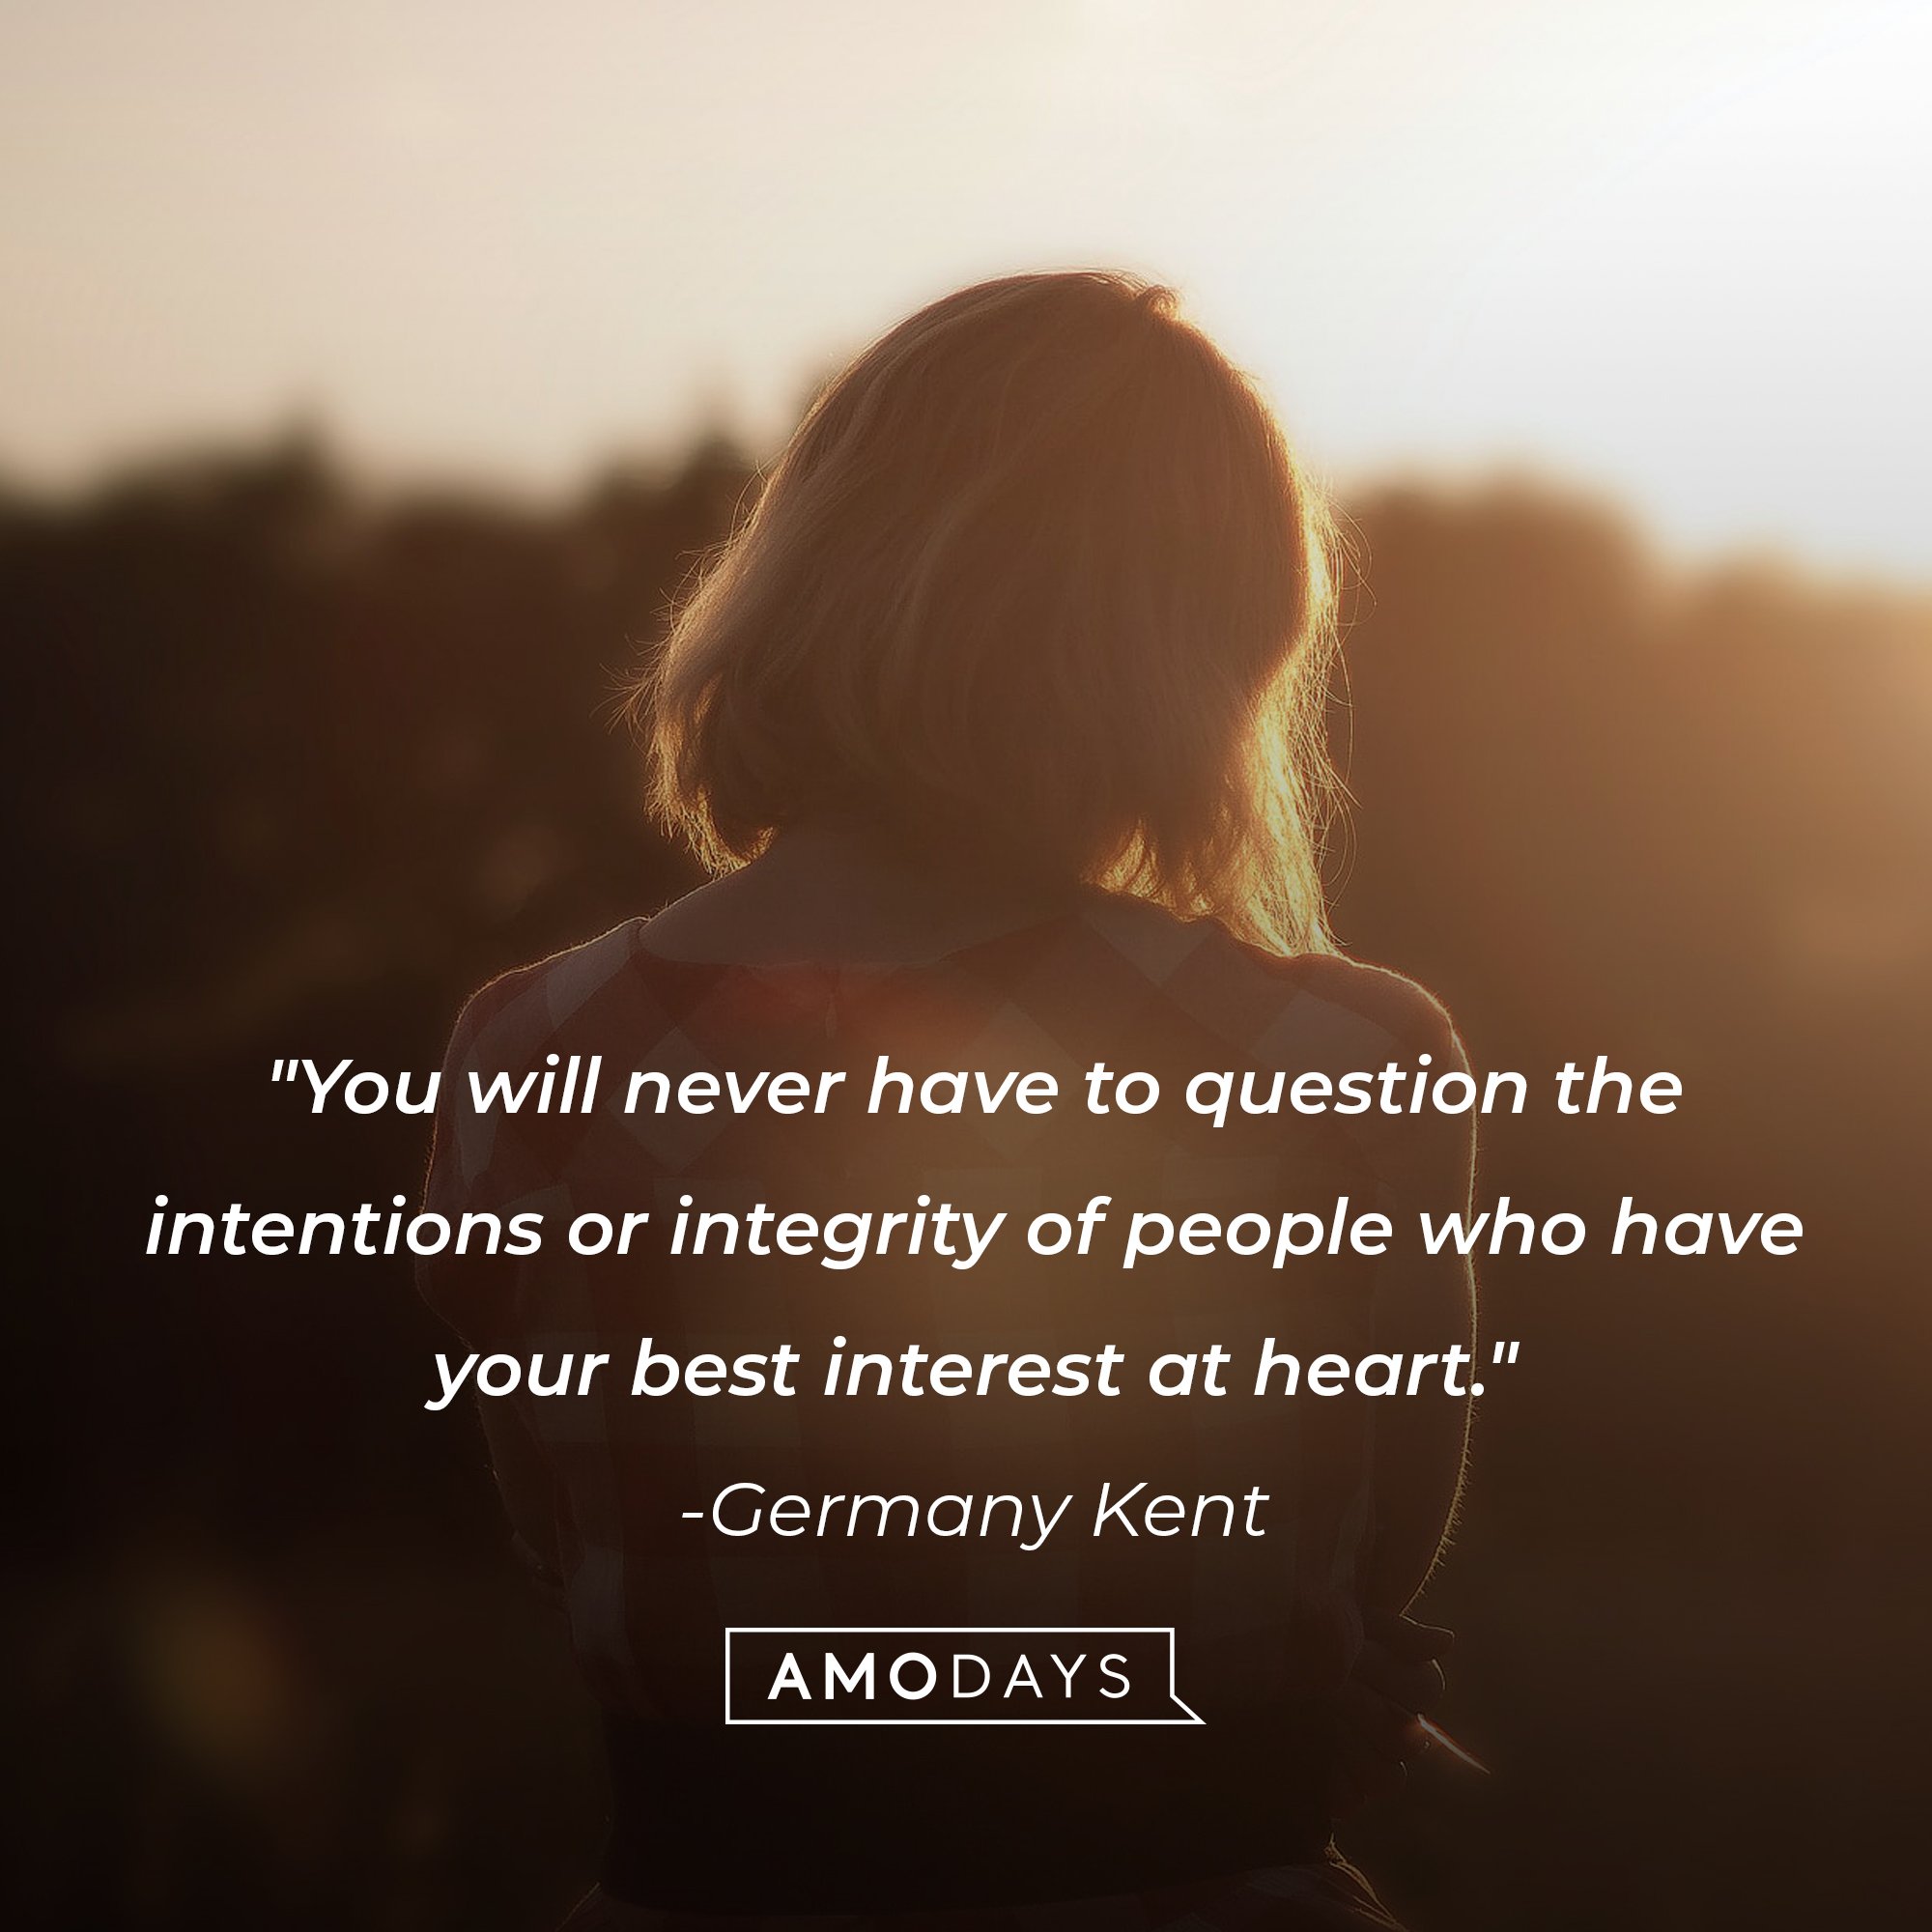 Germany Kent’s quote: "You will never have to question the intentions or integrity of people who have your best interest at heart."  | Image: AmoDays 